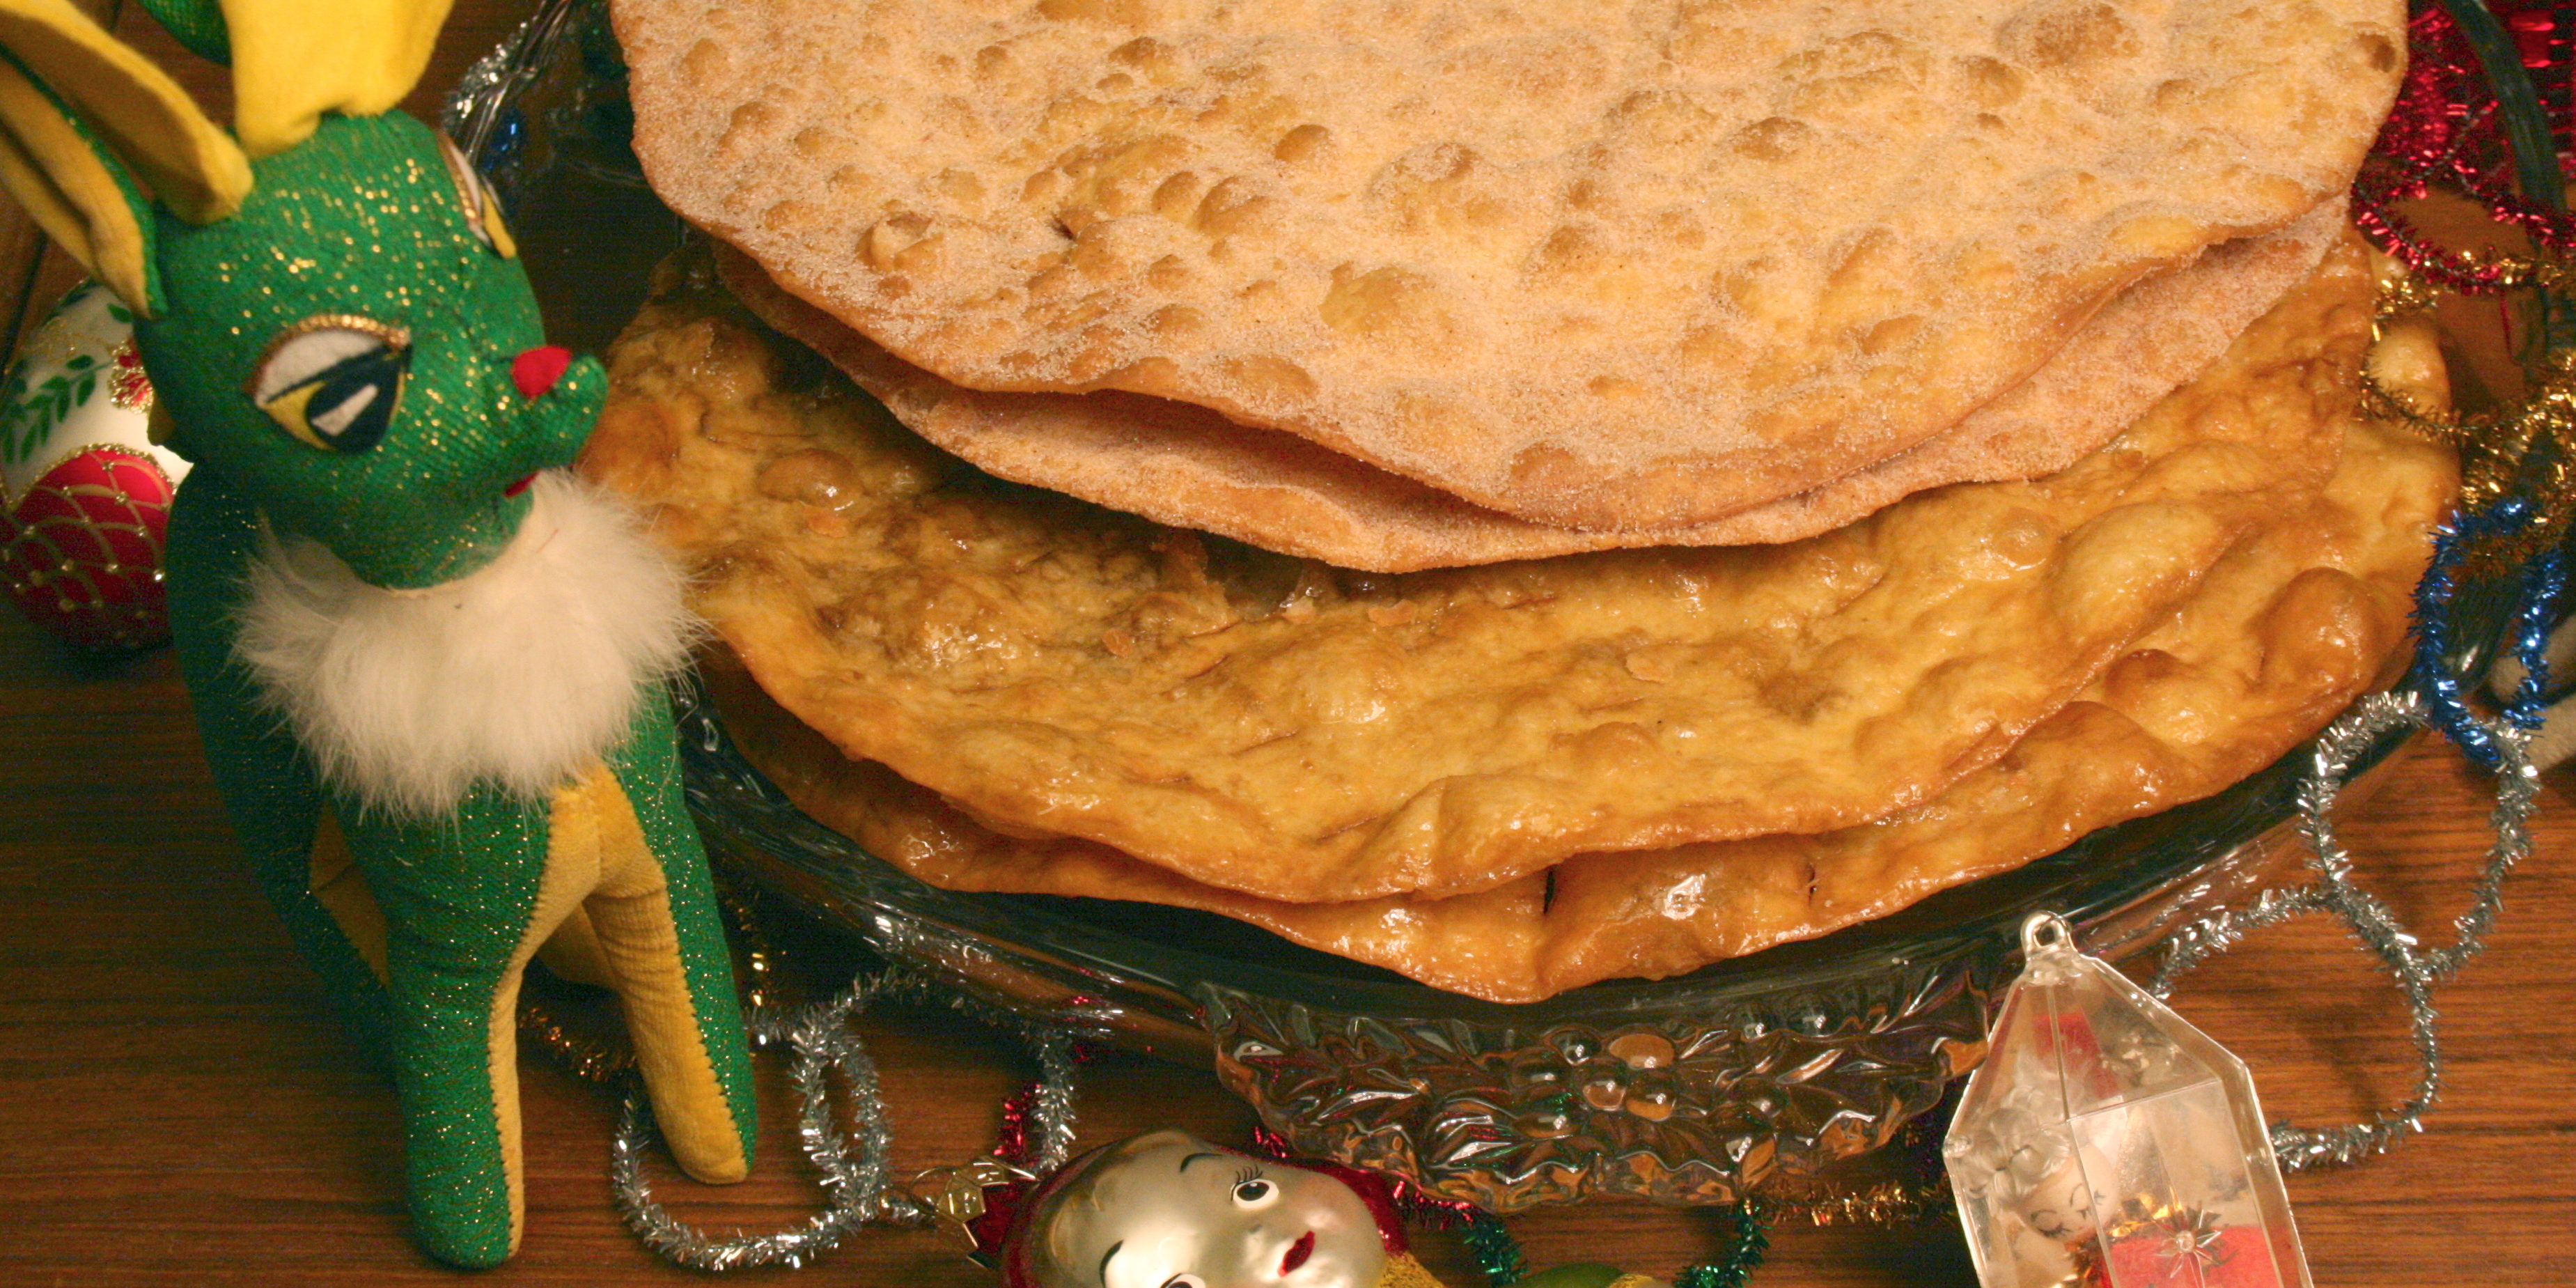 Easy to make Buñuelos for a touch of a Mexican Christmas!